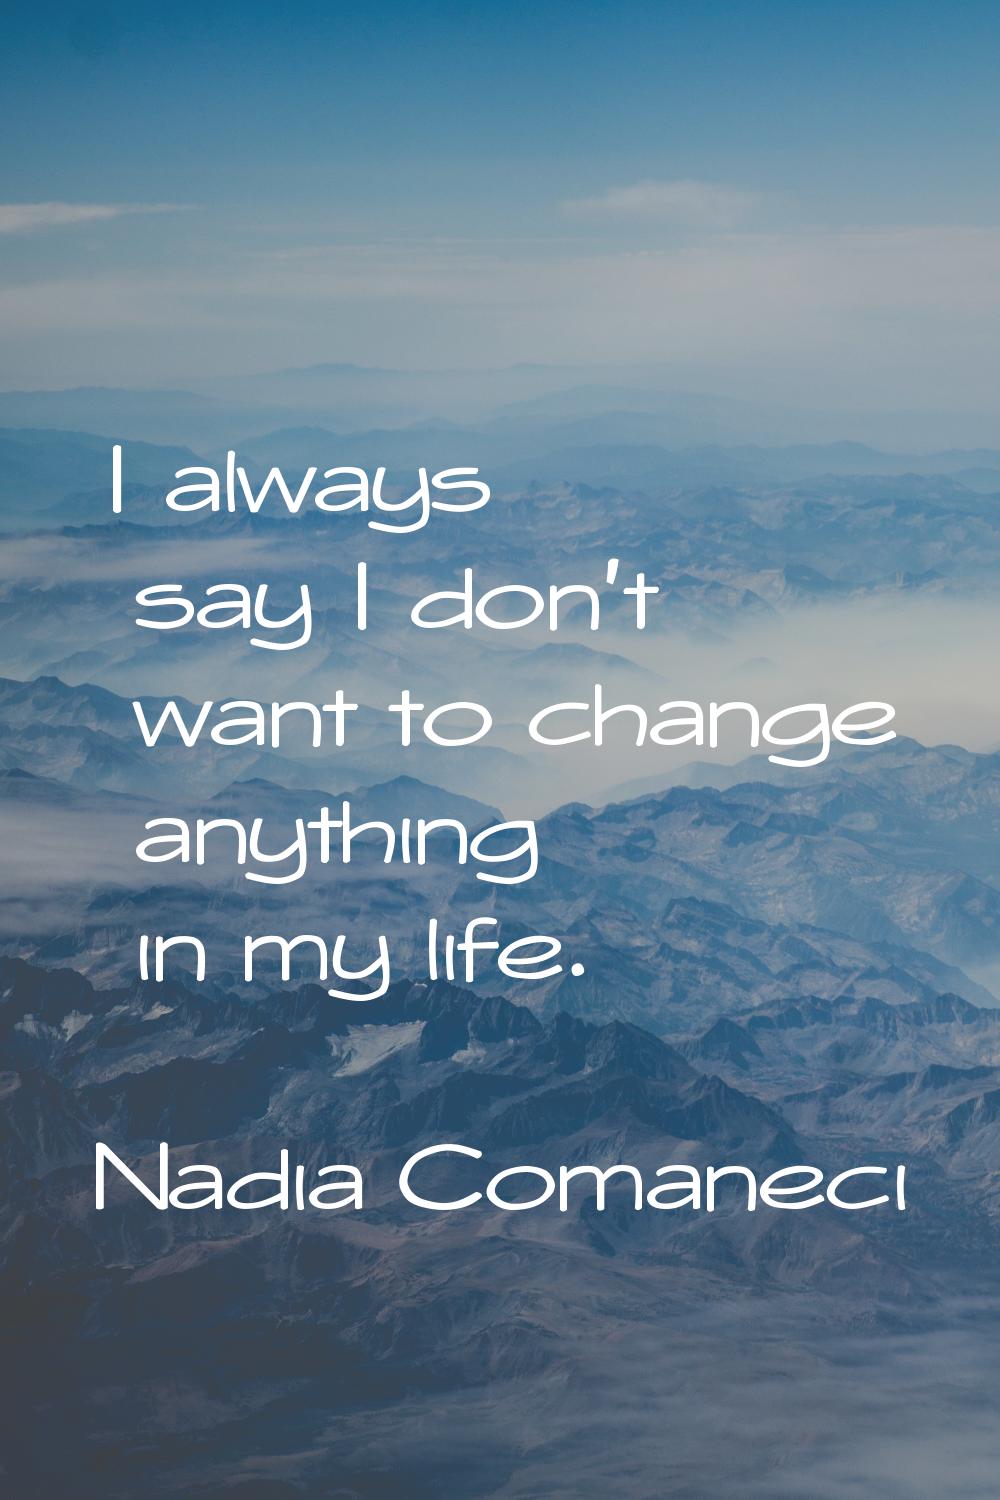 I always say I don't want to change anything in my life.